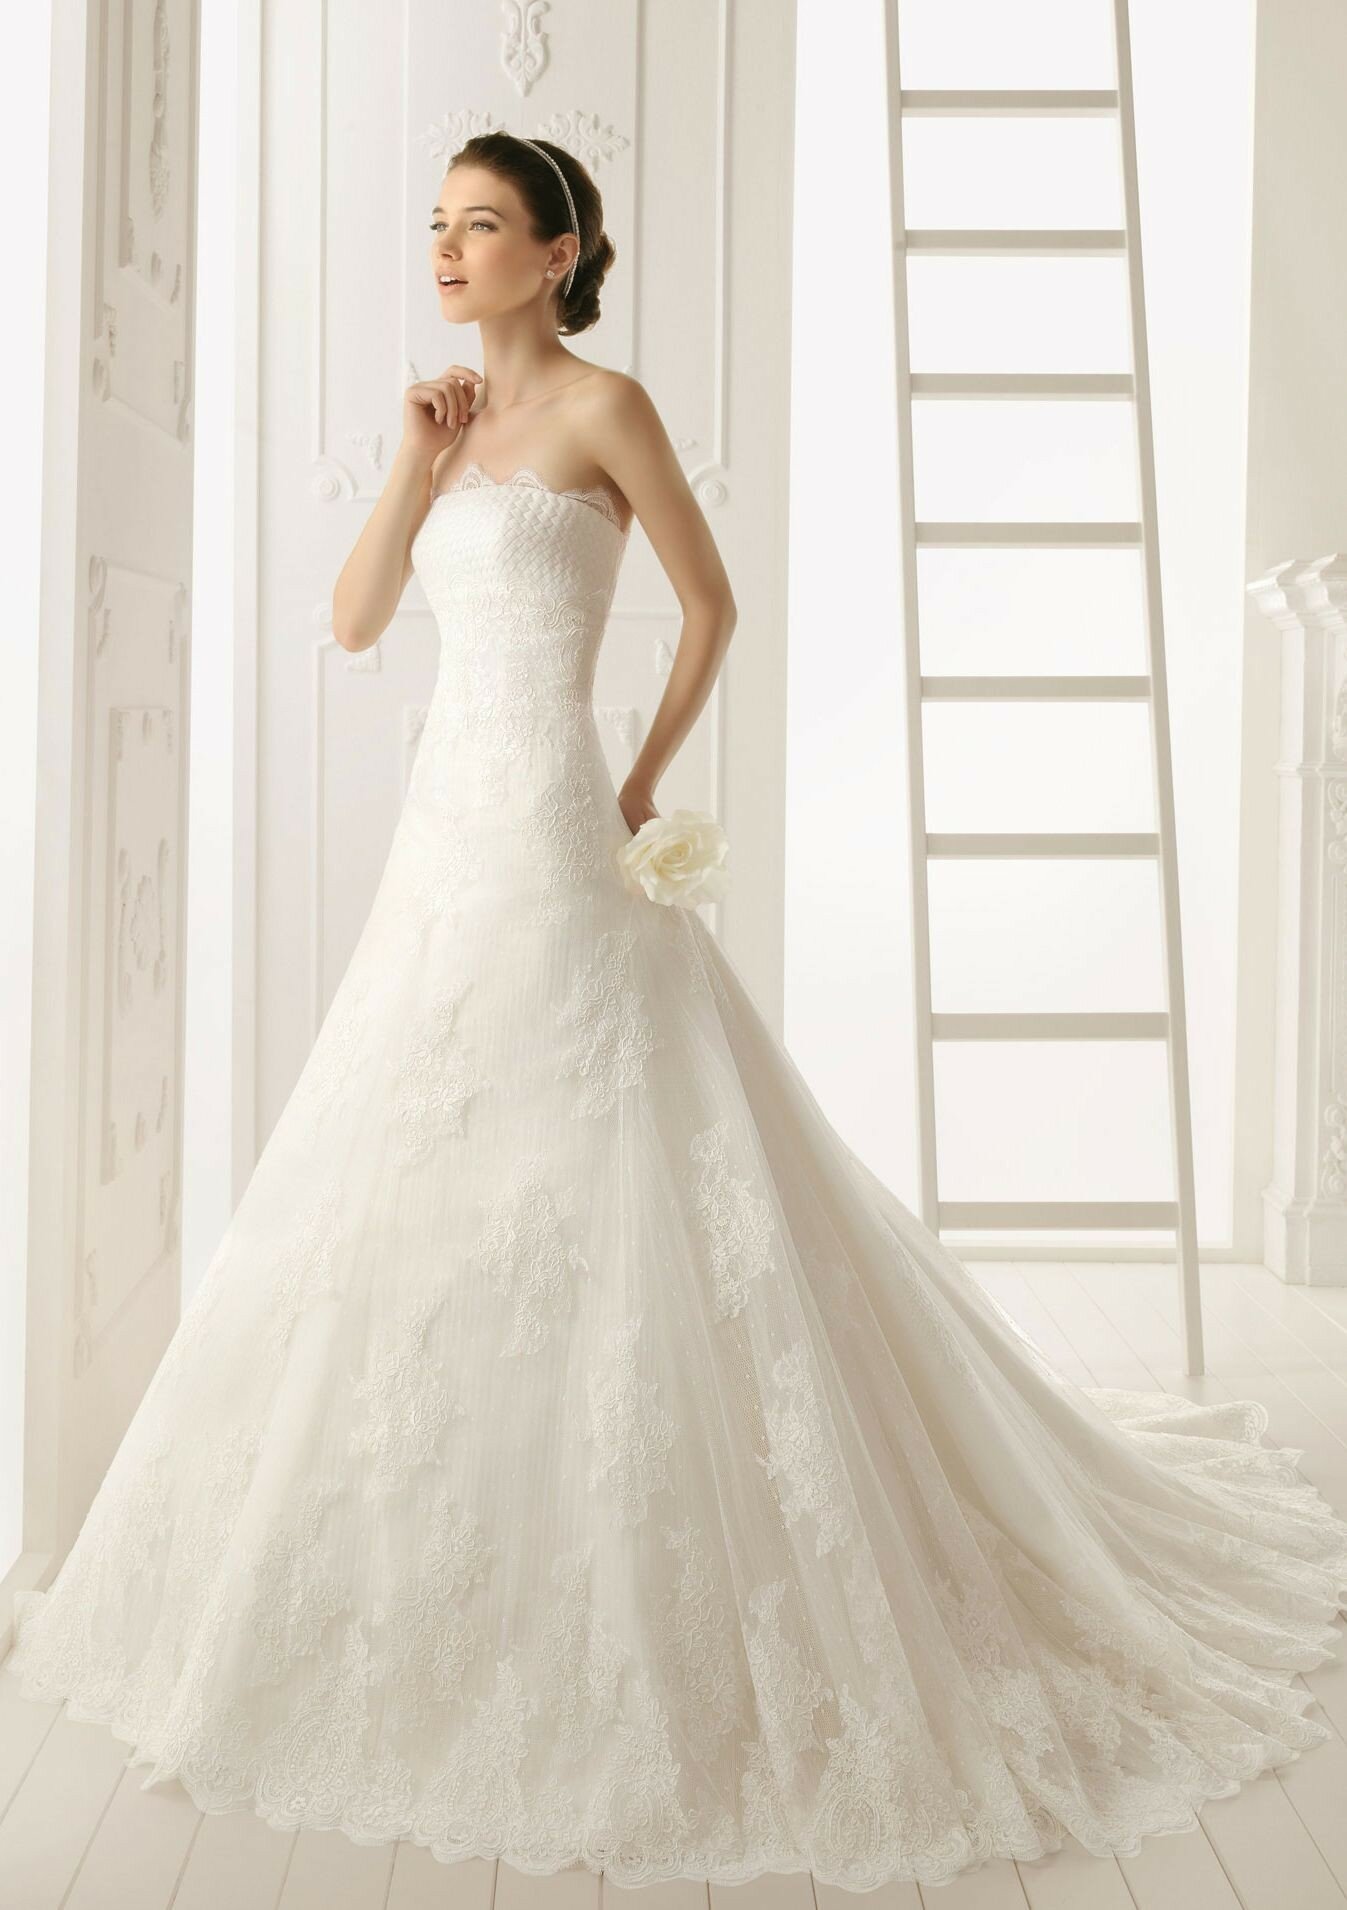 A line wedding dresses with cap sleeves Photo - 7